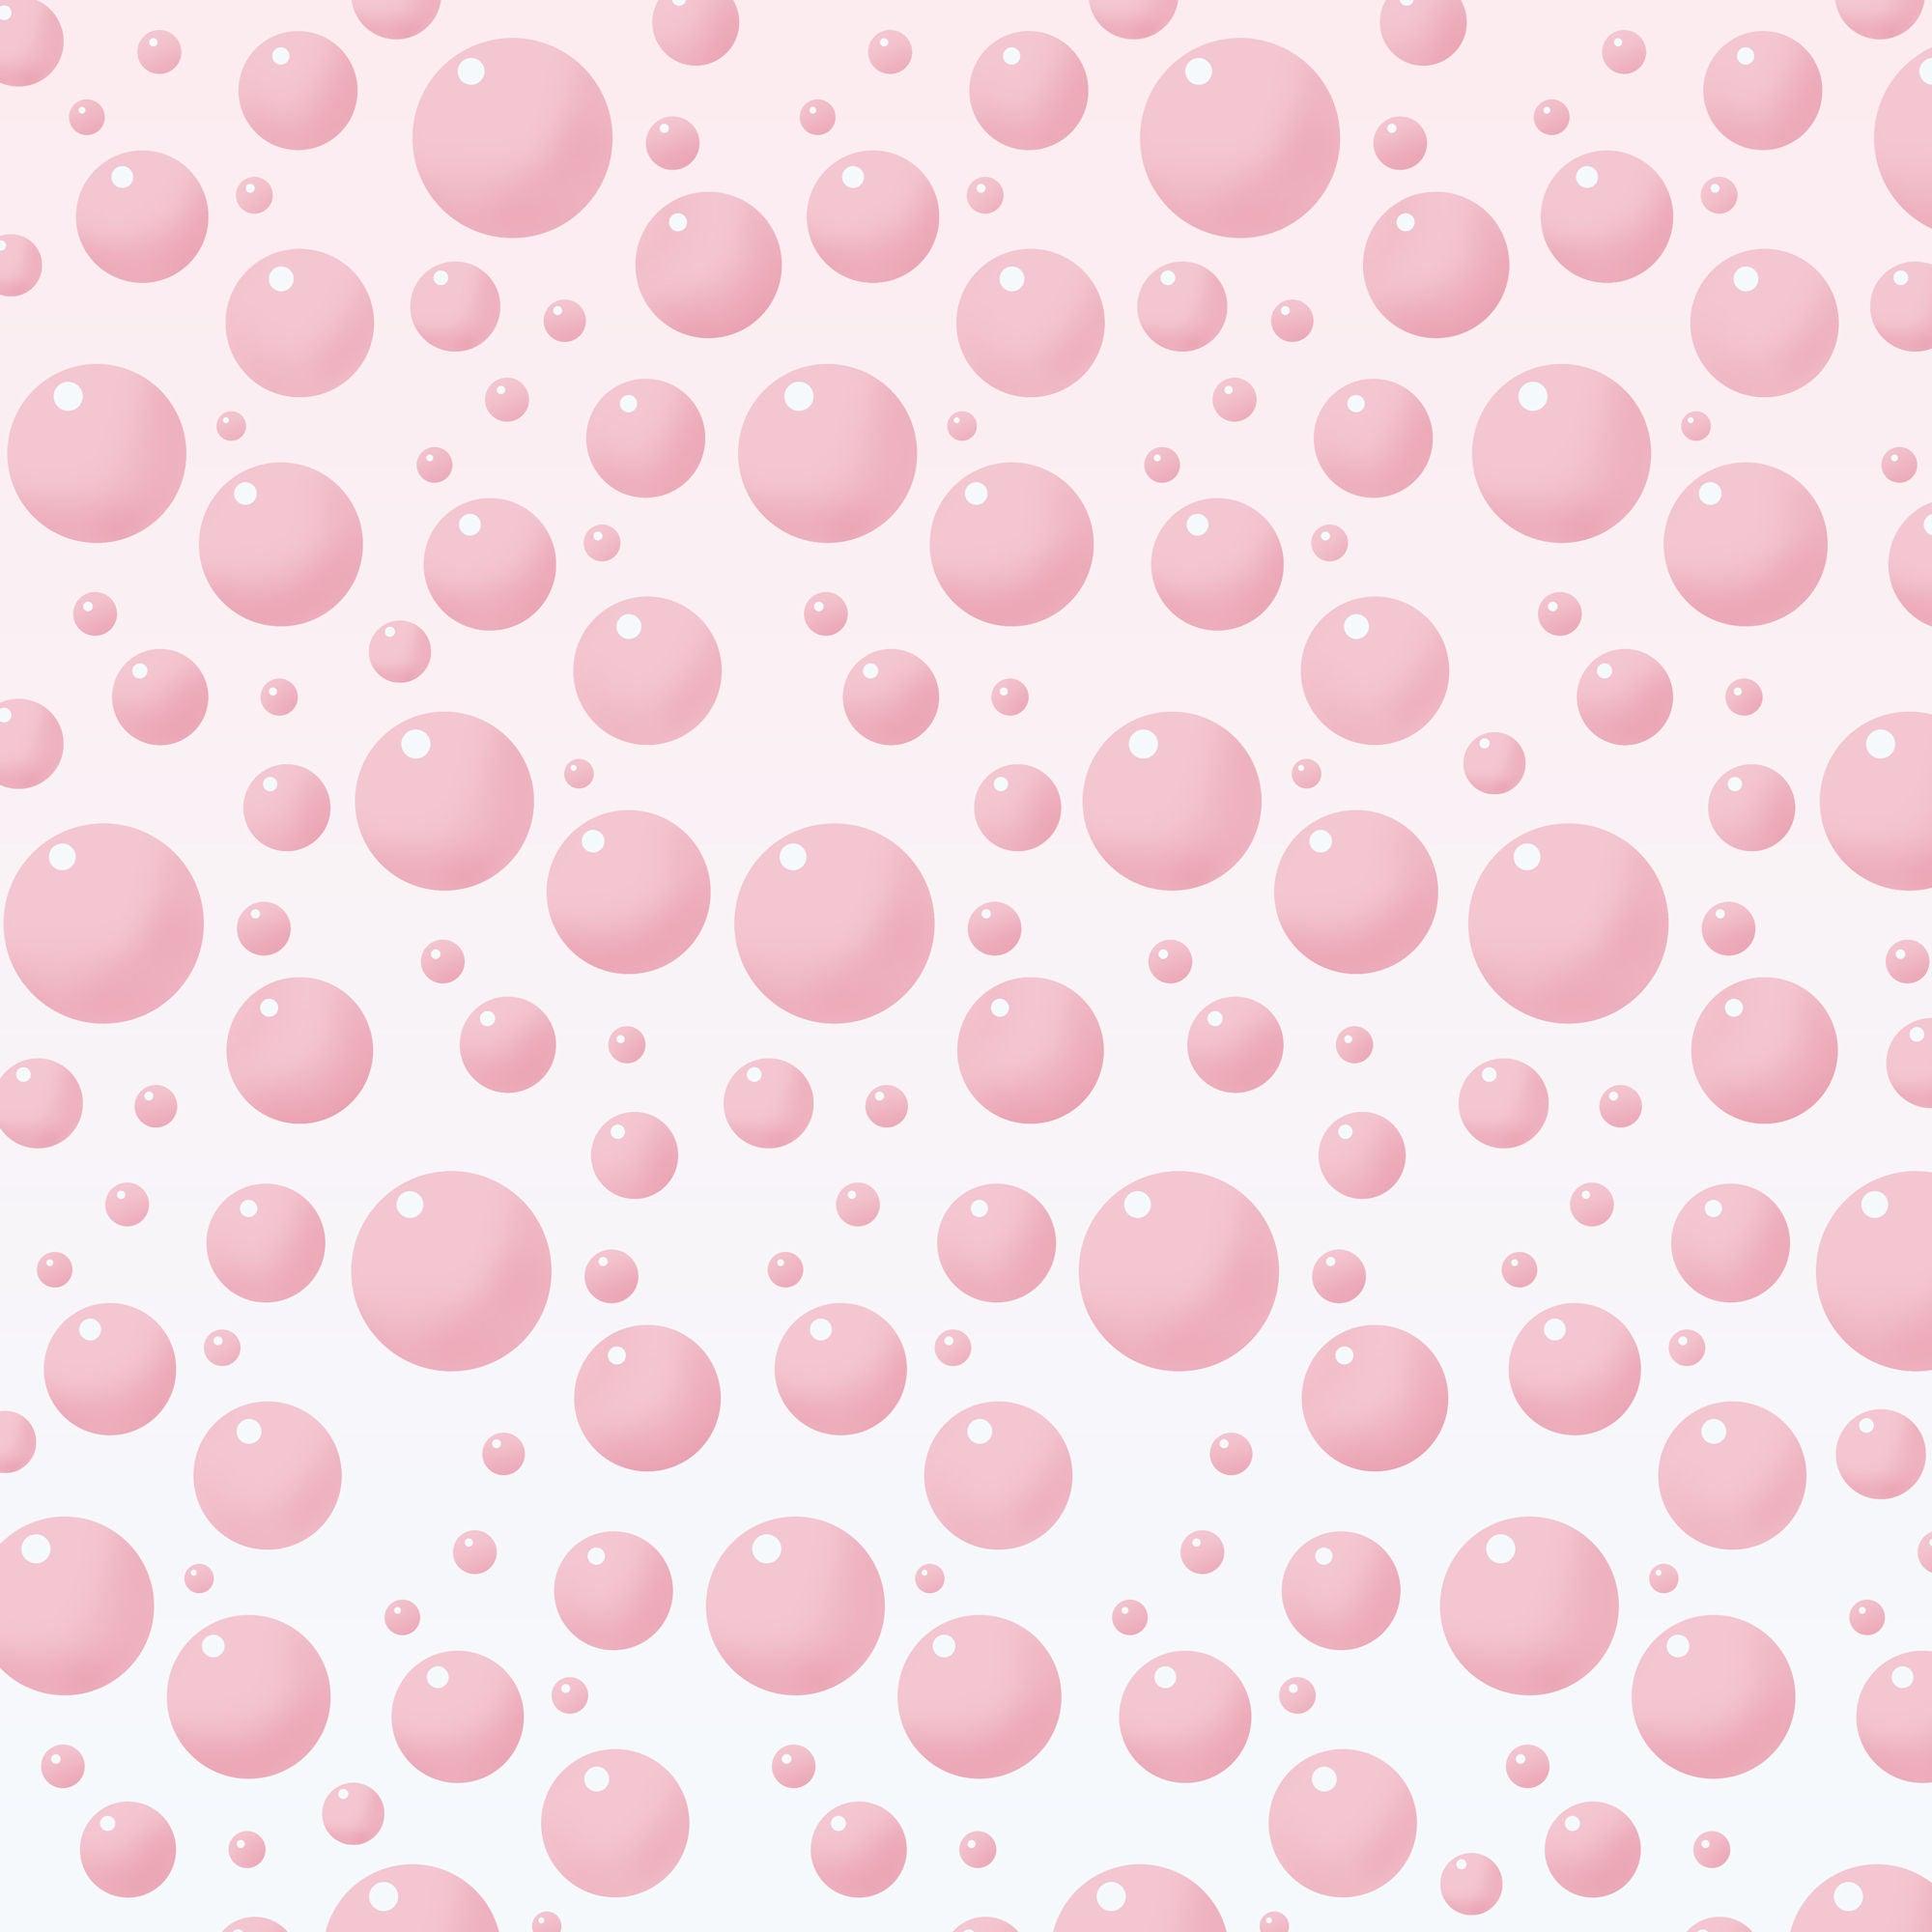 Bathtub Time Girl Collection Bubbles 12 x 12 Double-Sided Scrapbook Paper by SSC Designs - Scrapbook Supply Companies